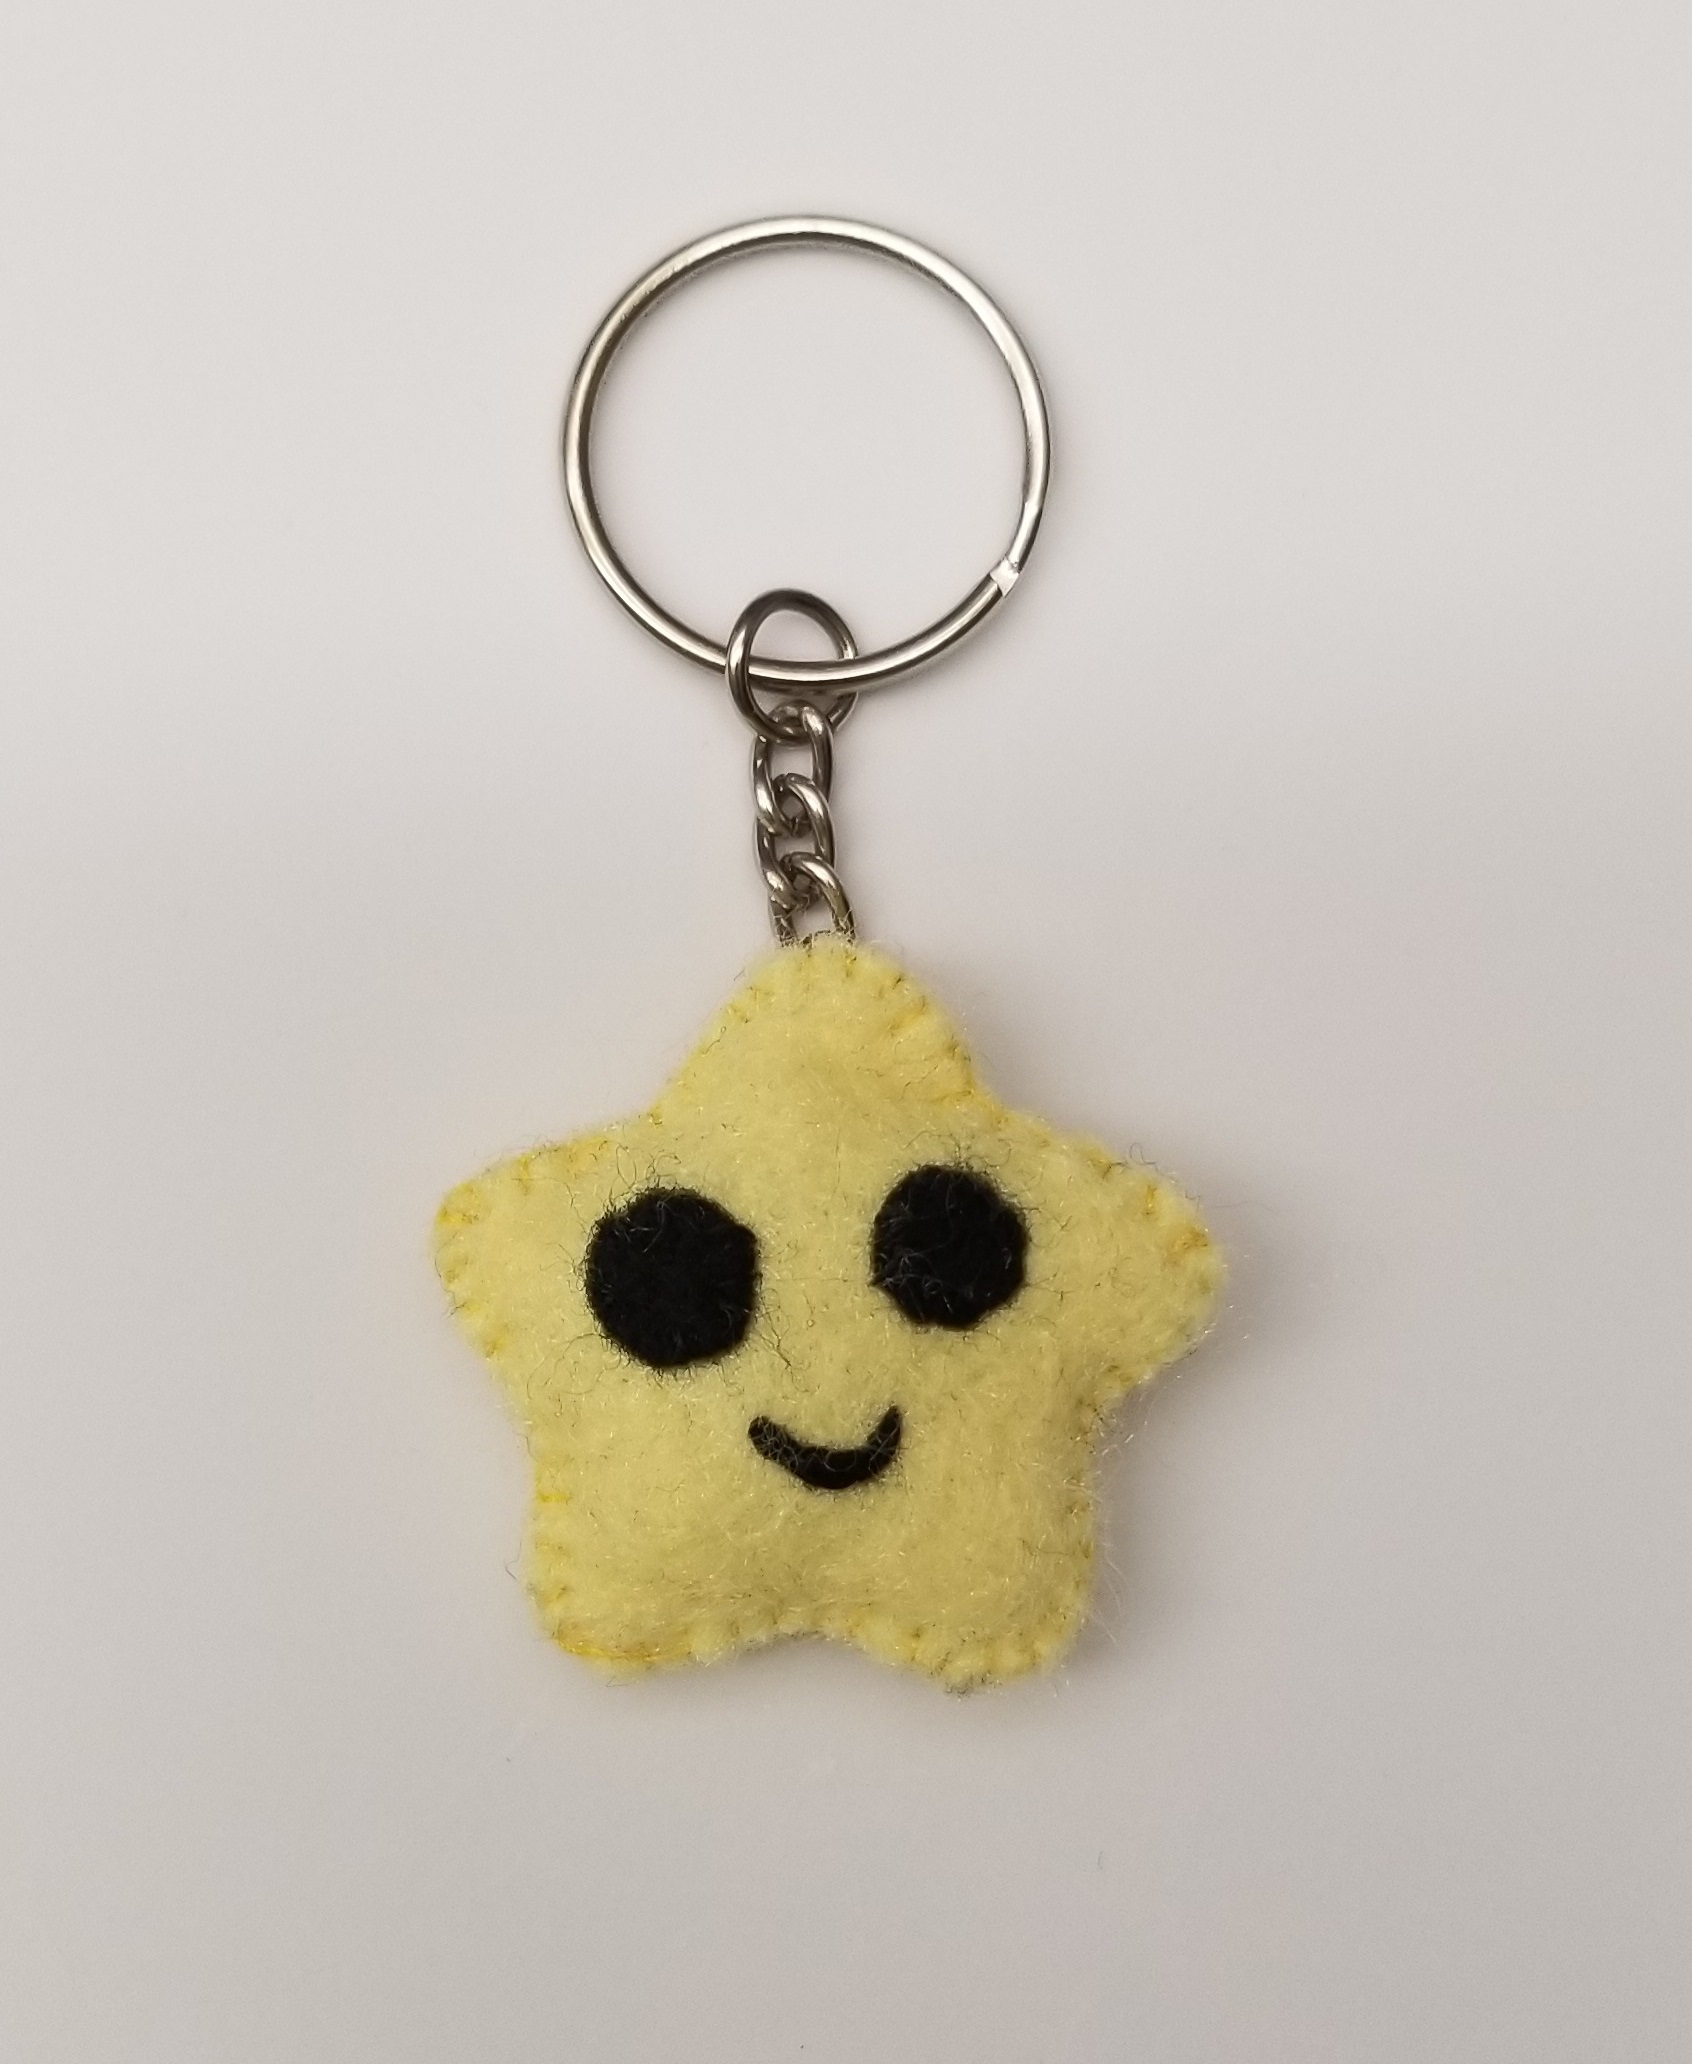 A sample of the craft, a small star keychain